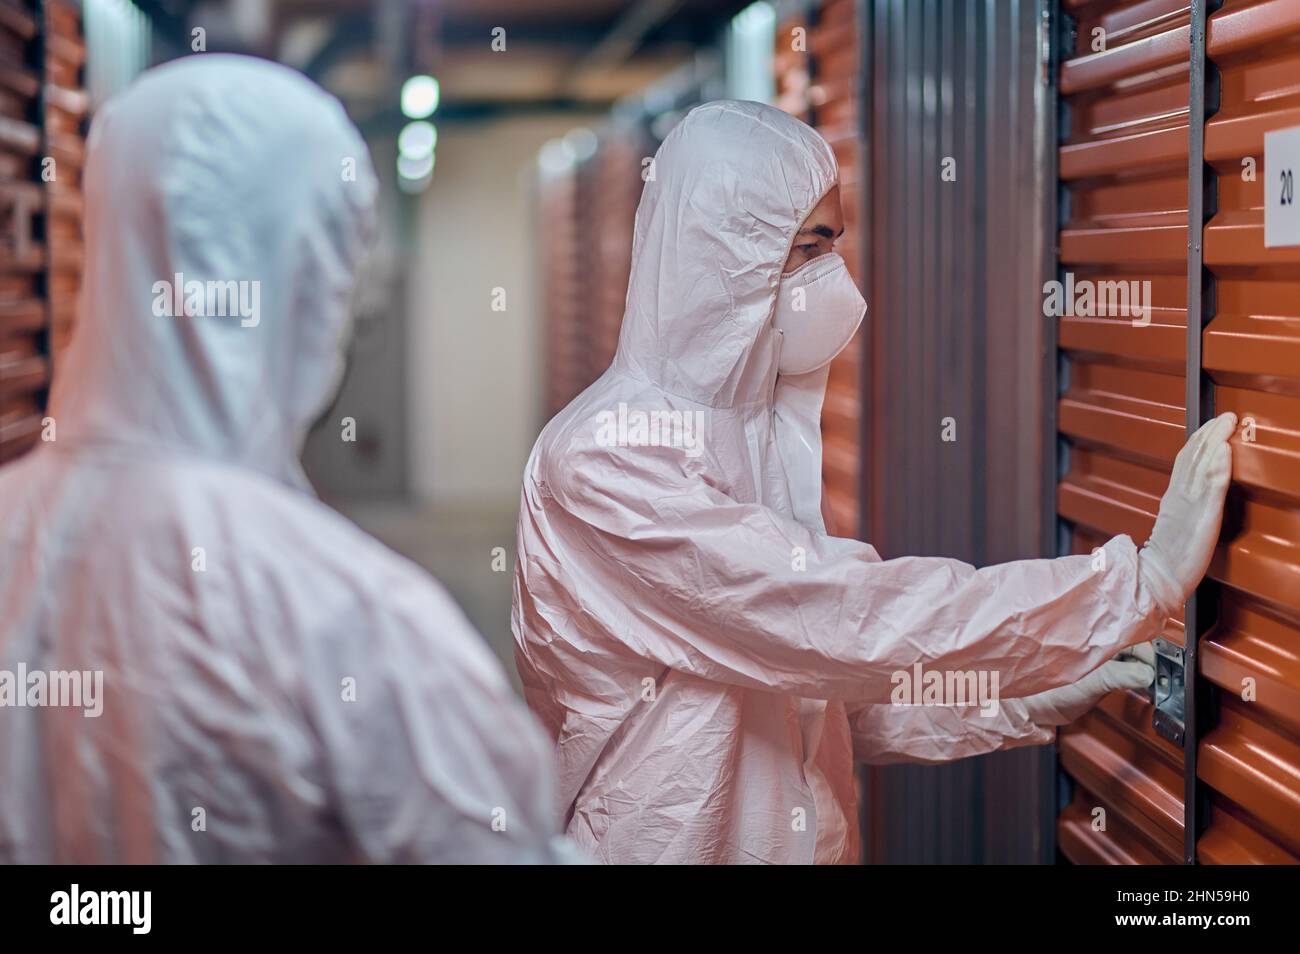 Two people in hazmat suits standing in the storehouse Stock Photo